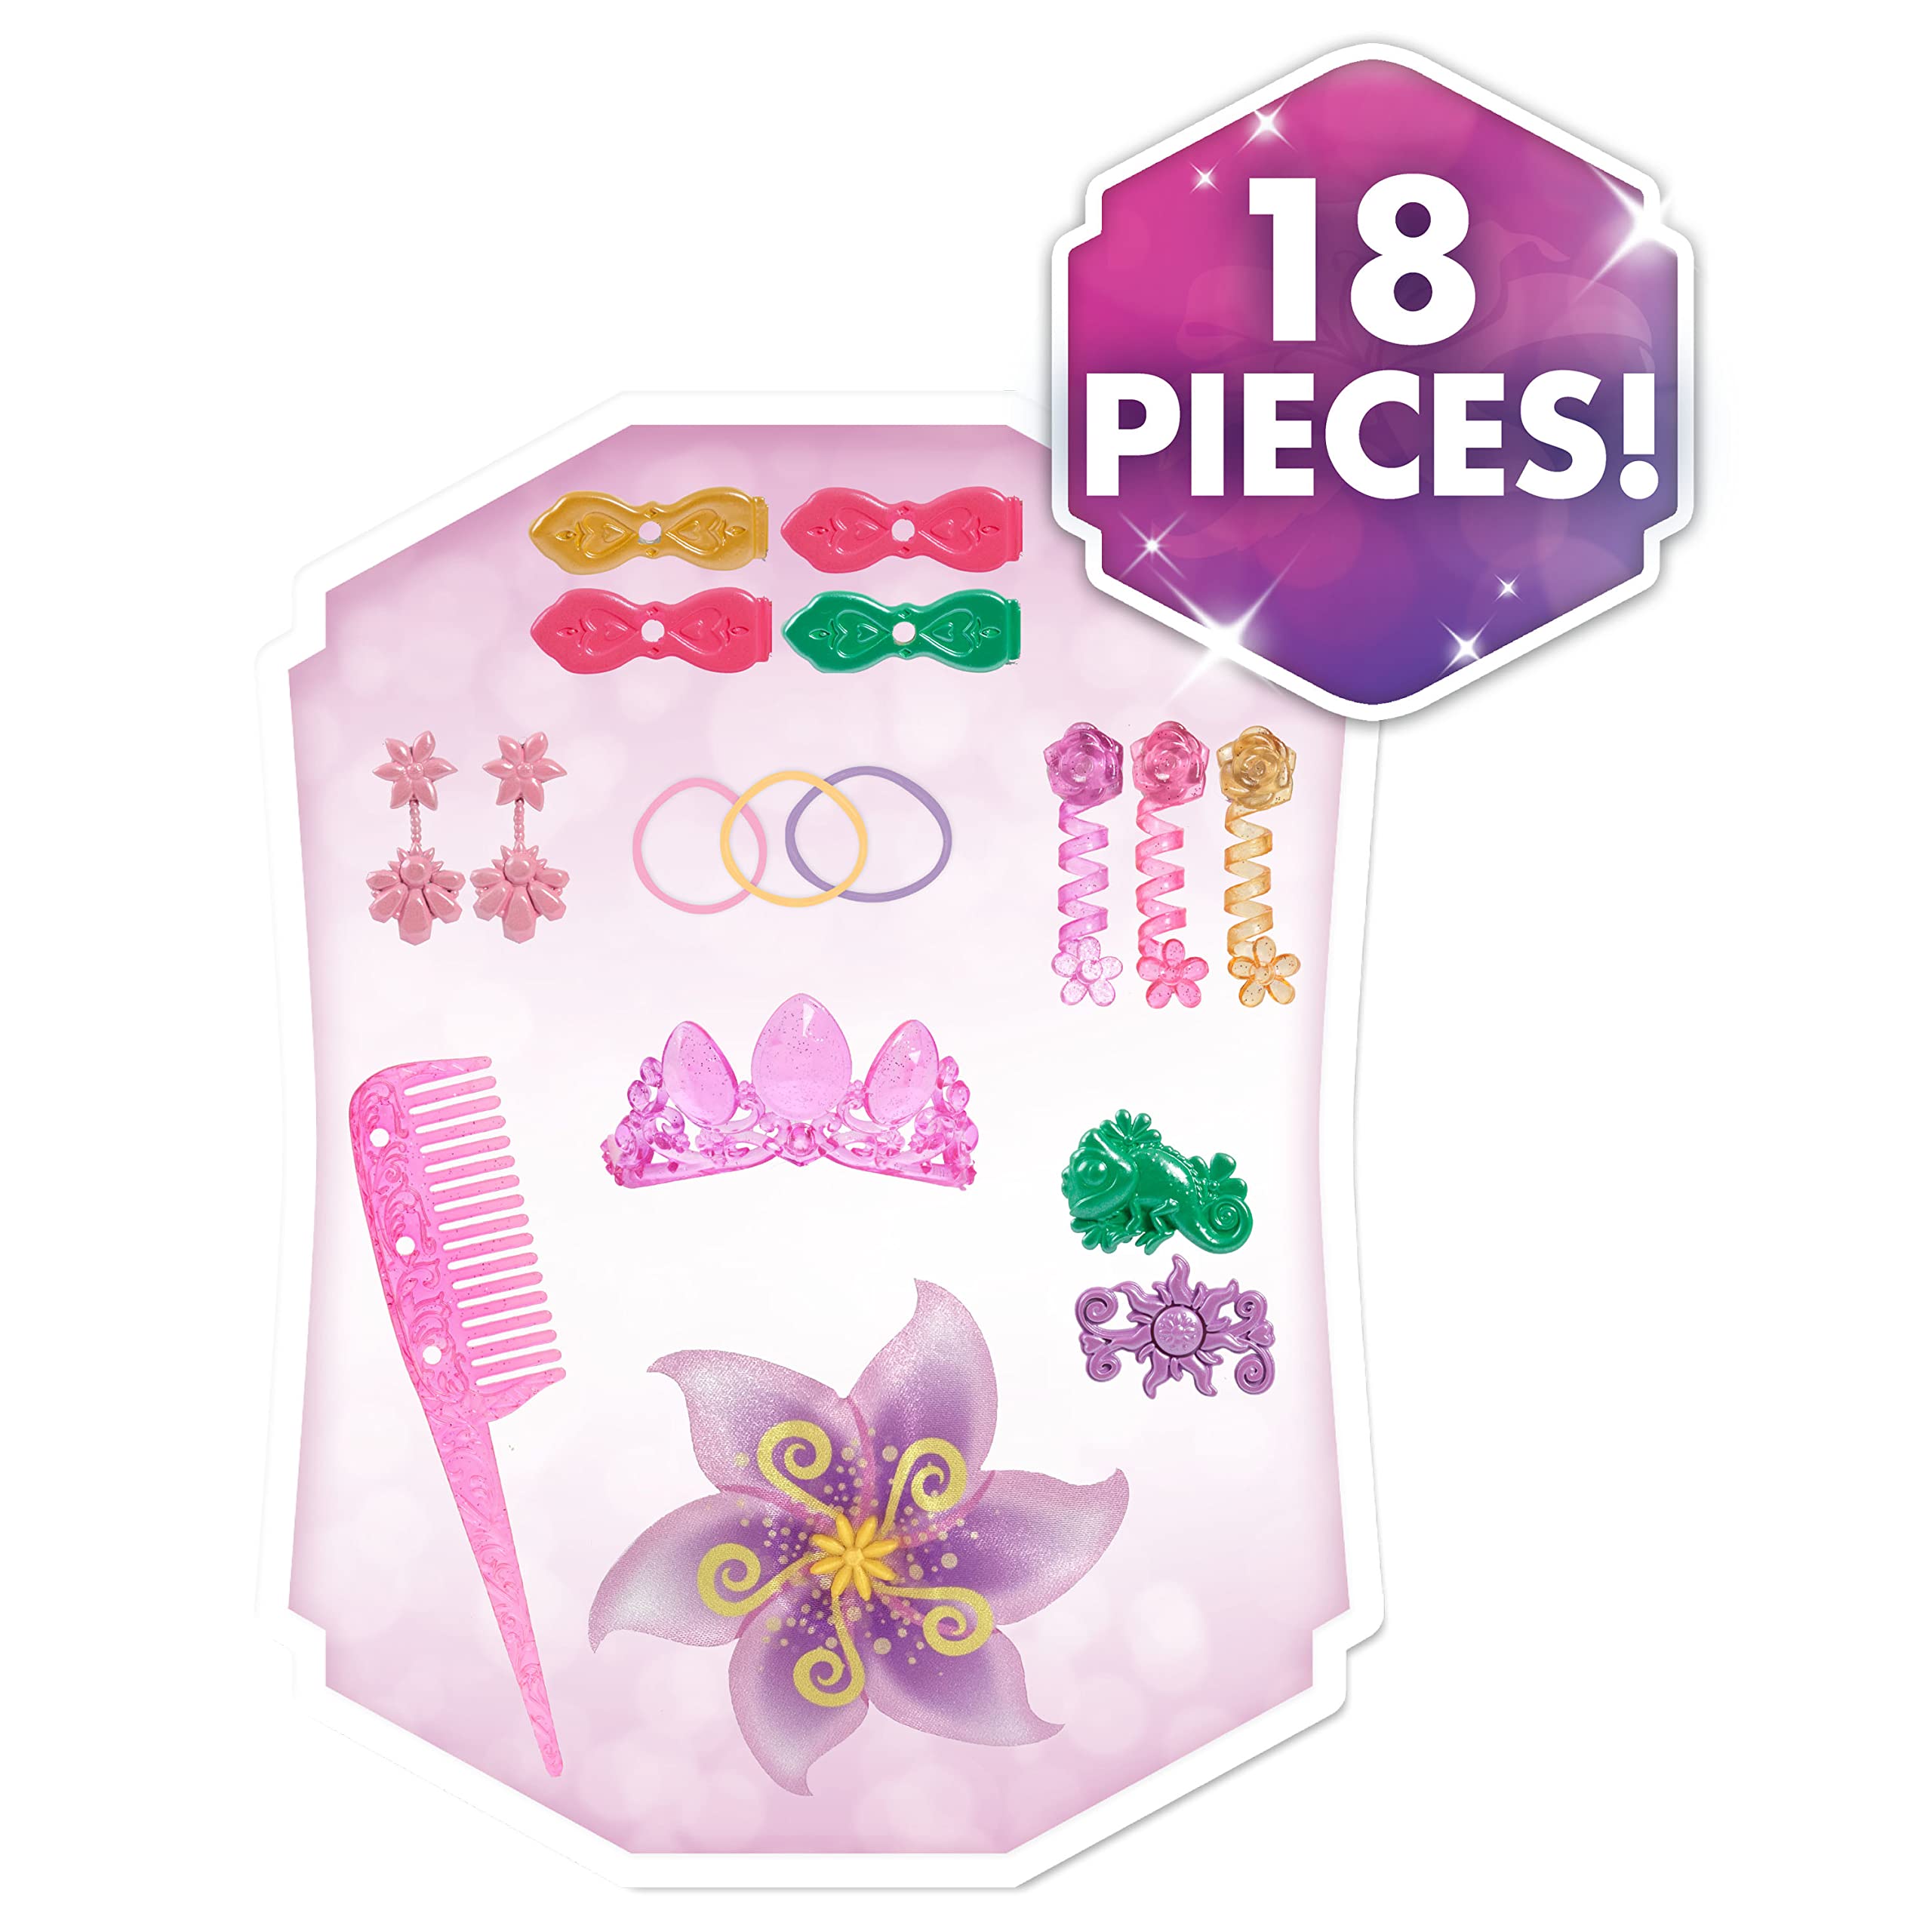 Disney Princess Rapunzel Styling Head, 18-pieces, Pretend Play, Officially Licensed Kids Toys for Ages 3 Up, Gifts and Presents by Just Play